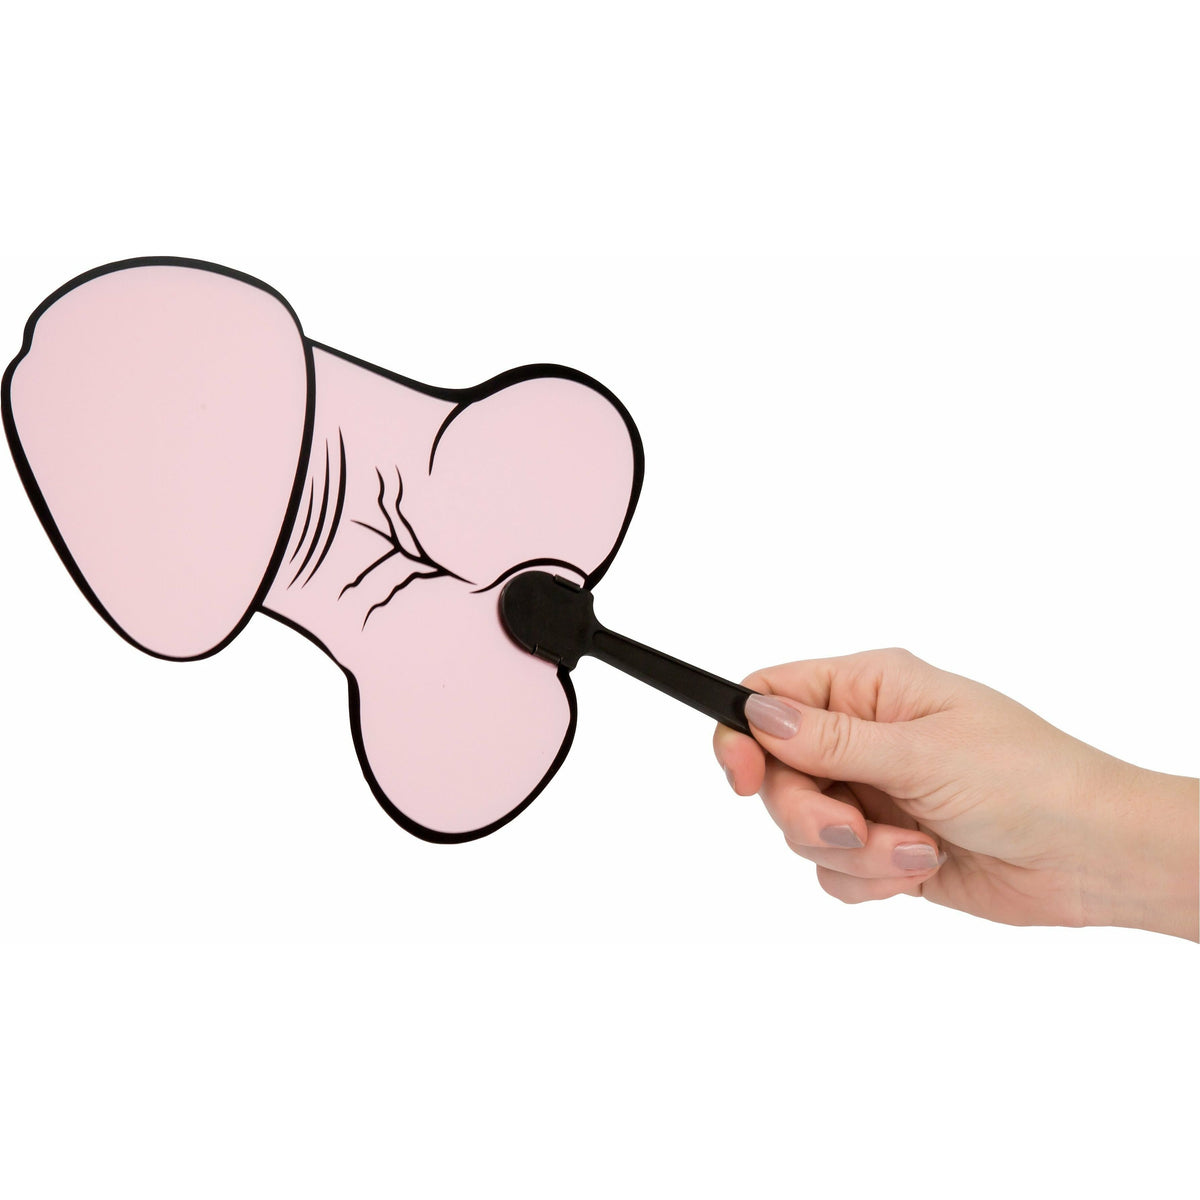 Pipedream Products Bachelorette Party Favors Willy Fan